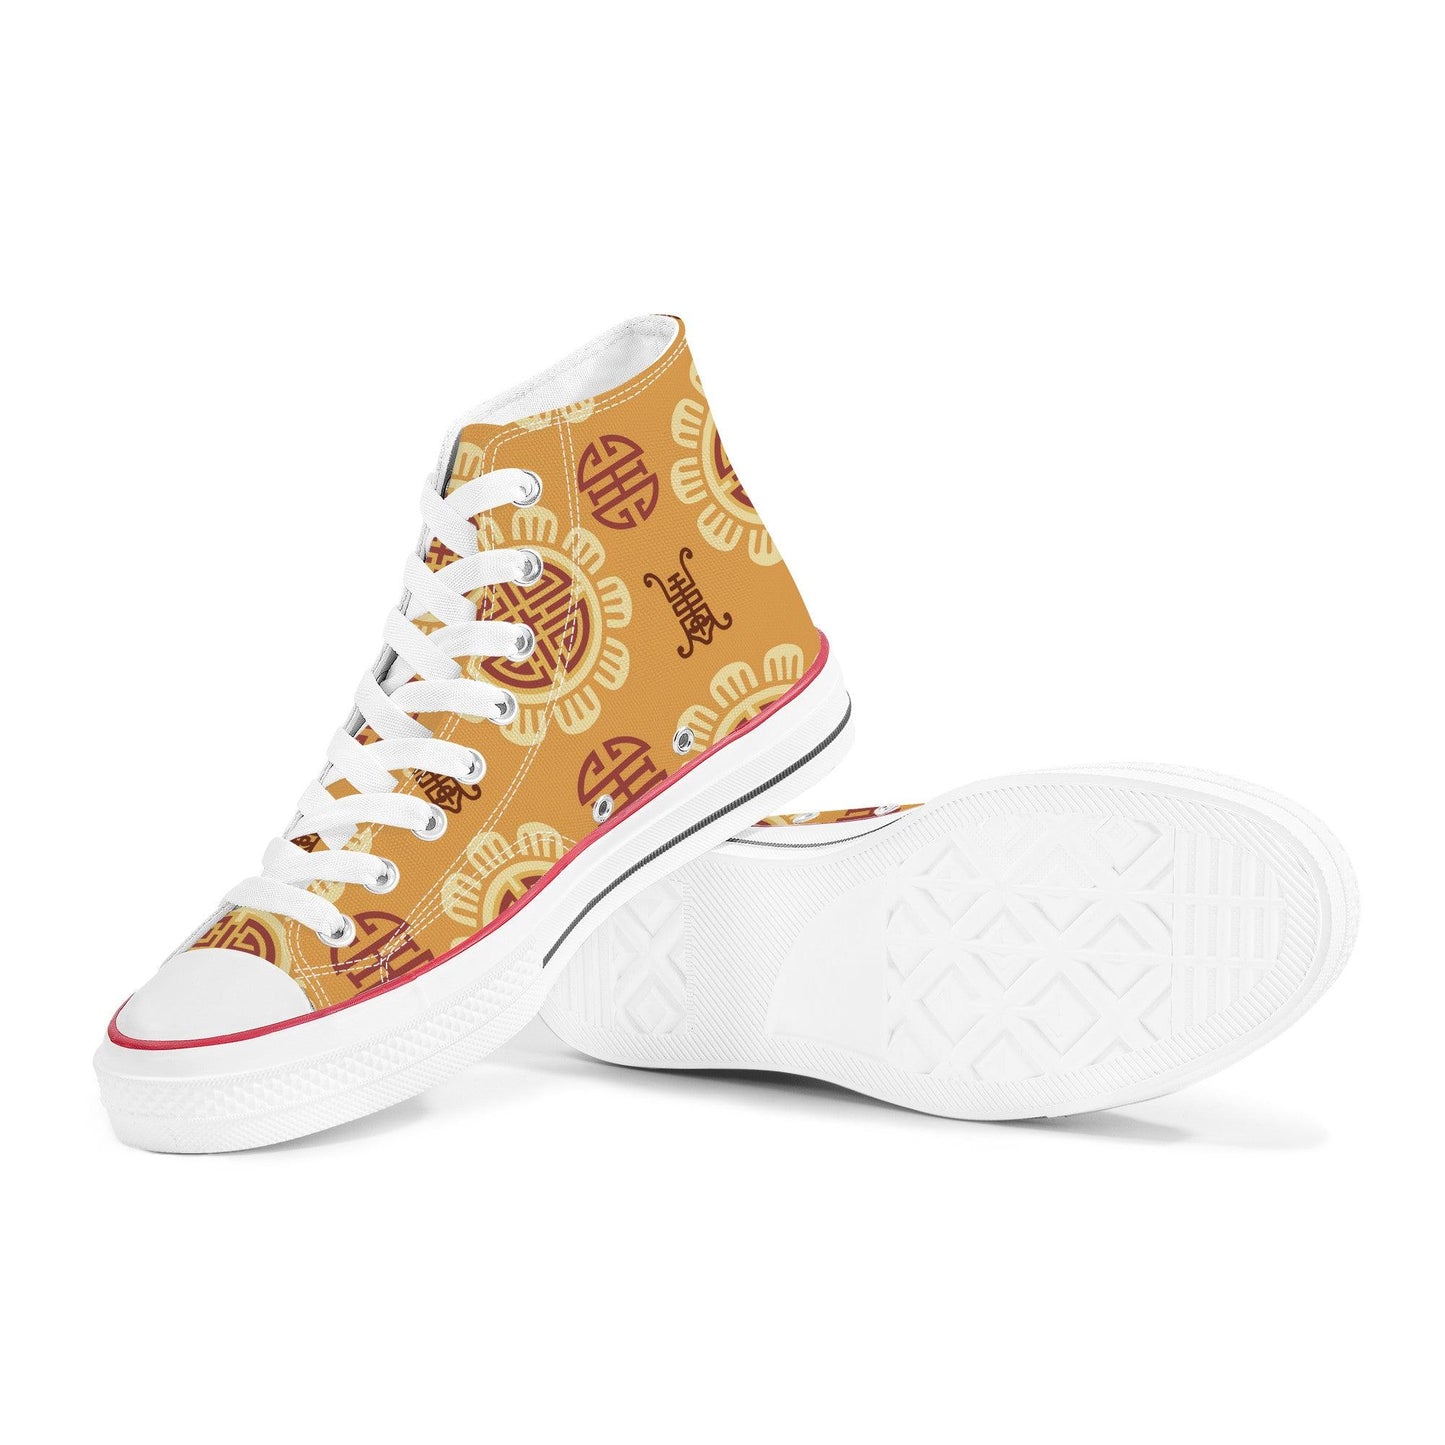 Origami - High Top Canvas Shoes - Kaito Japan Design 